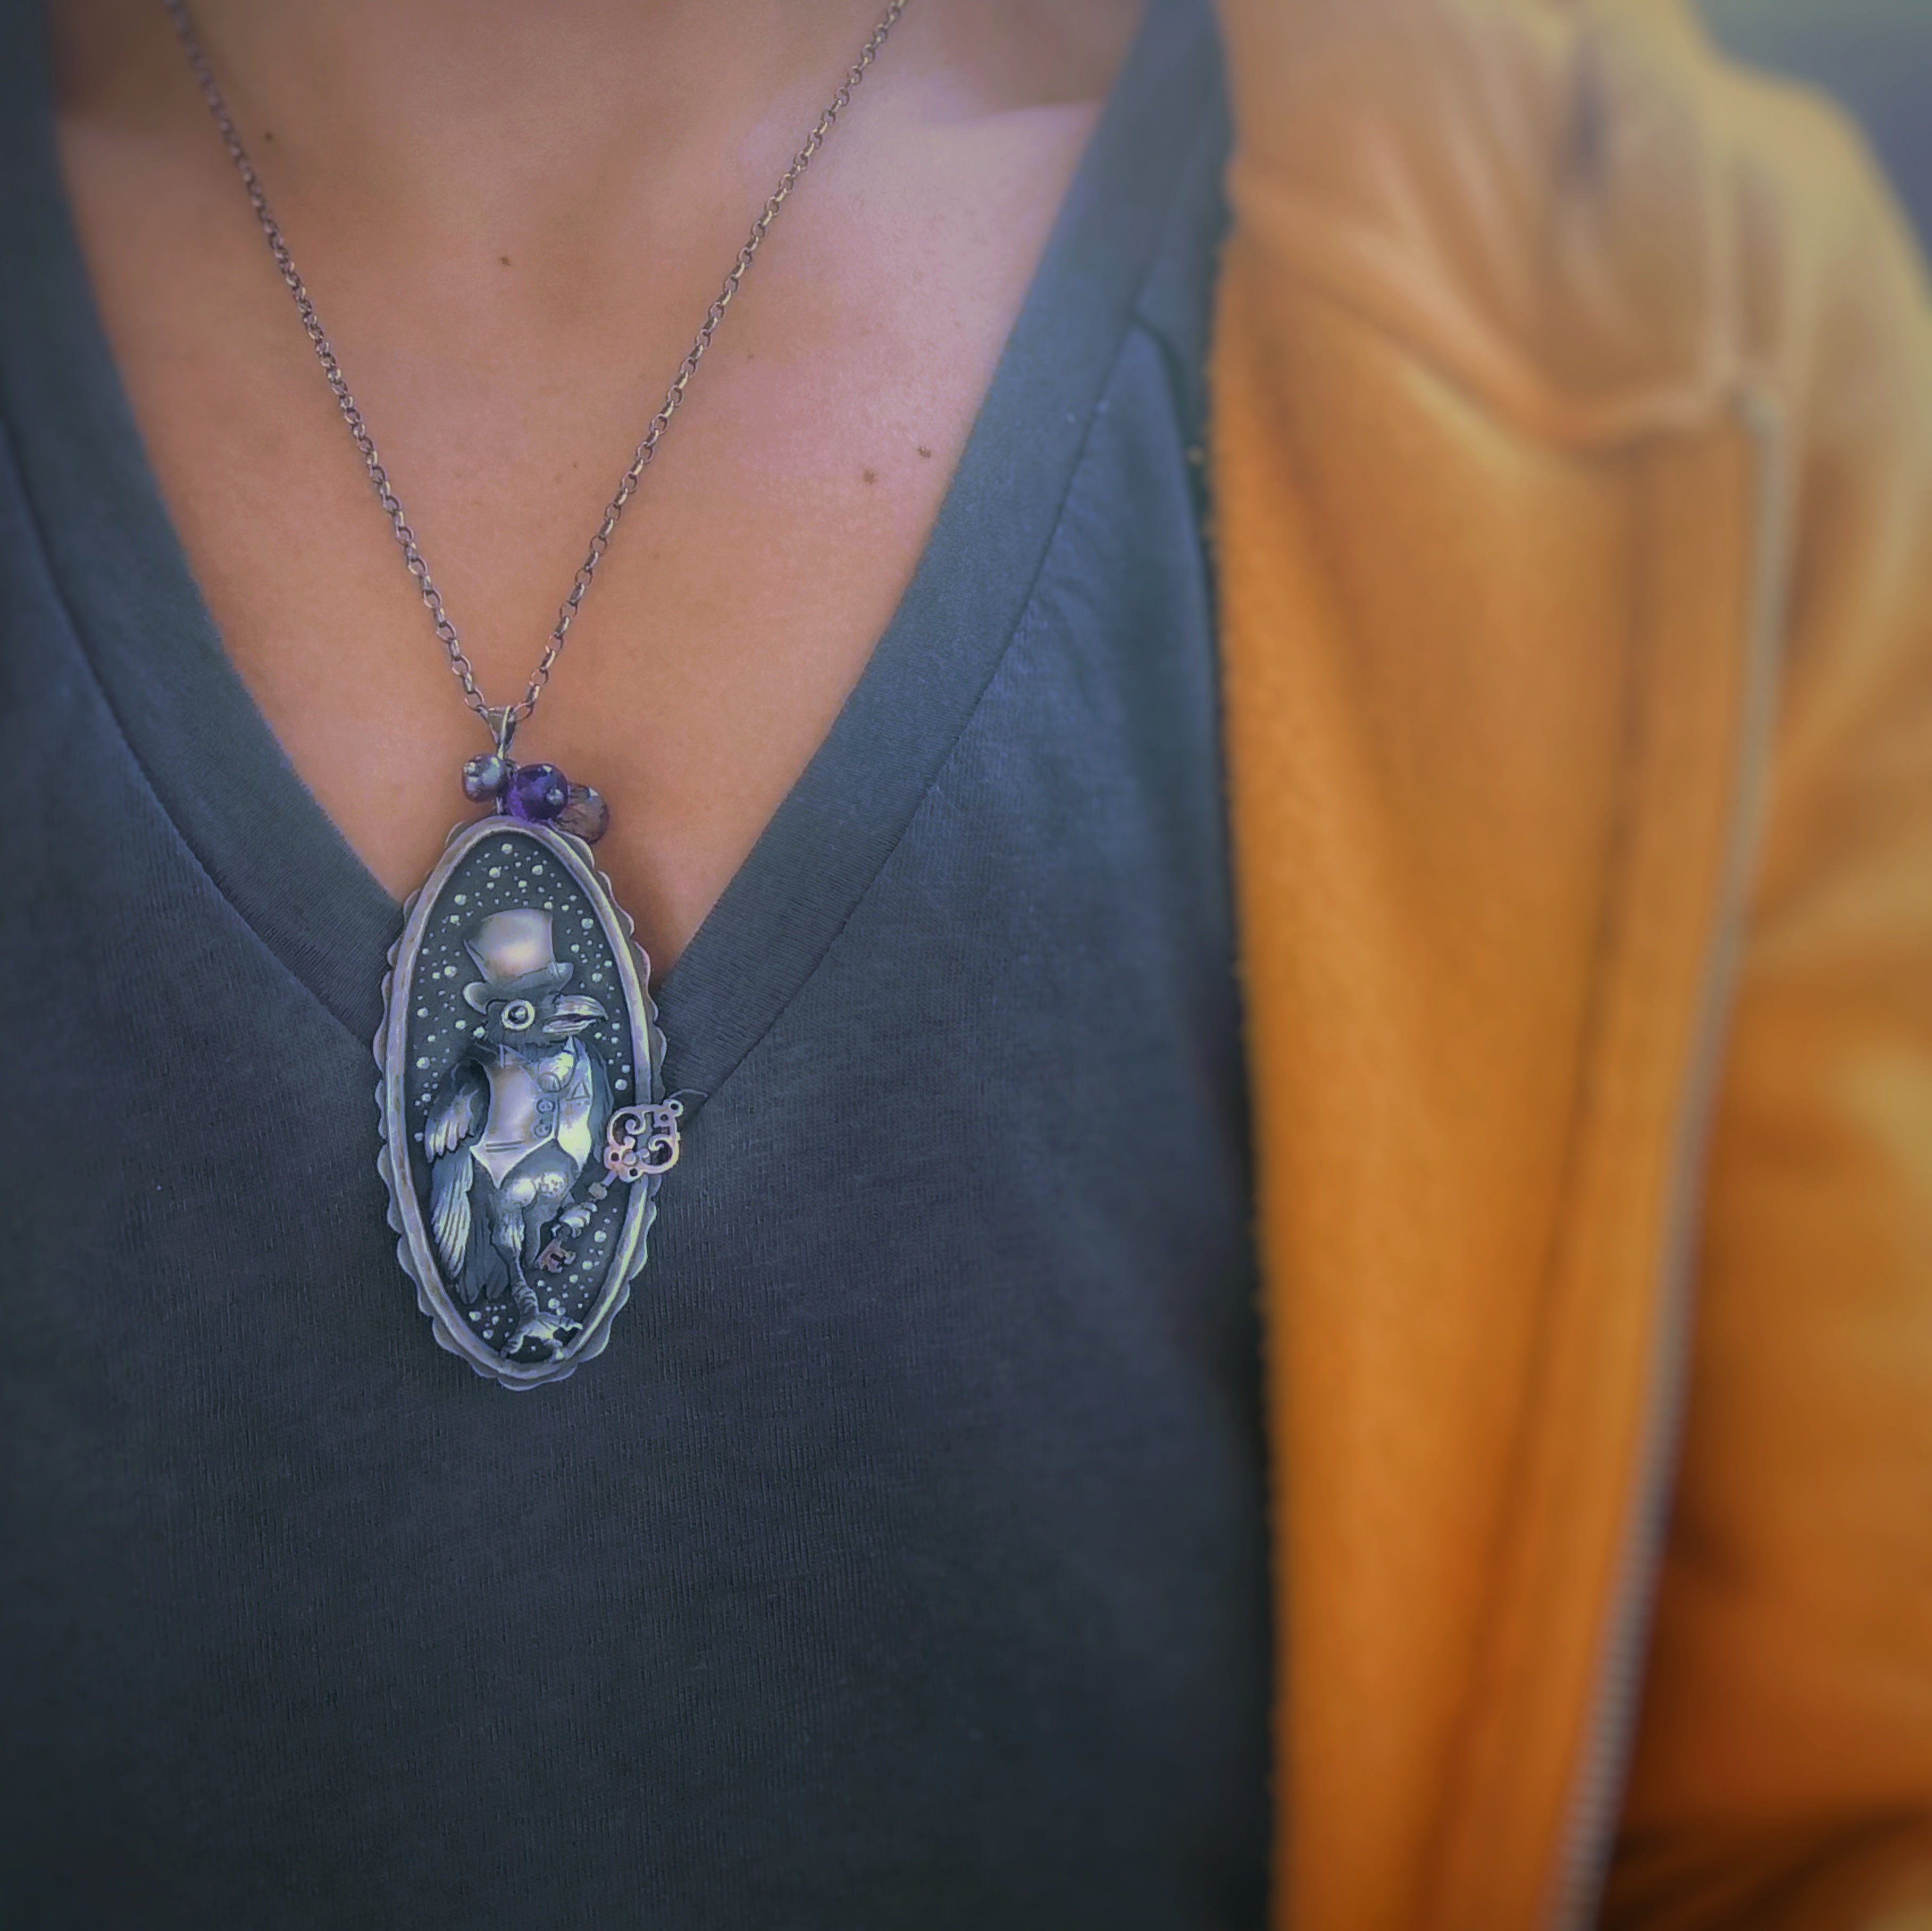 The Secret Keeper Necklace